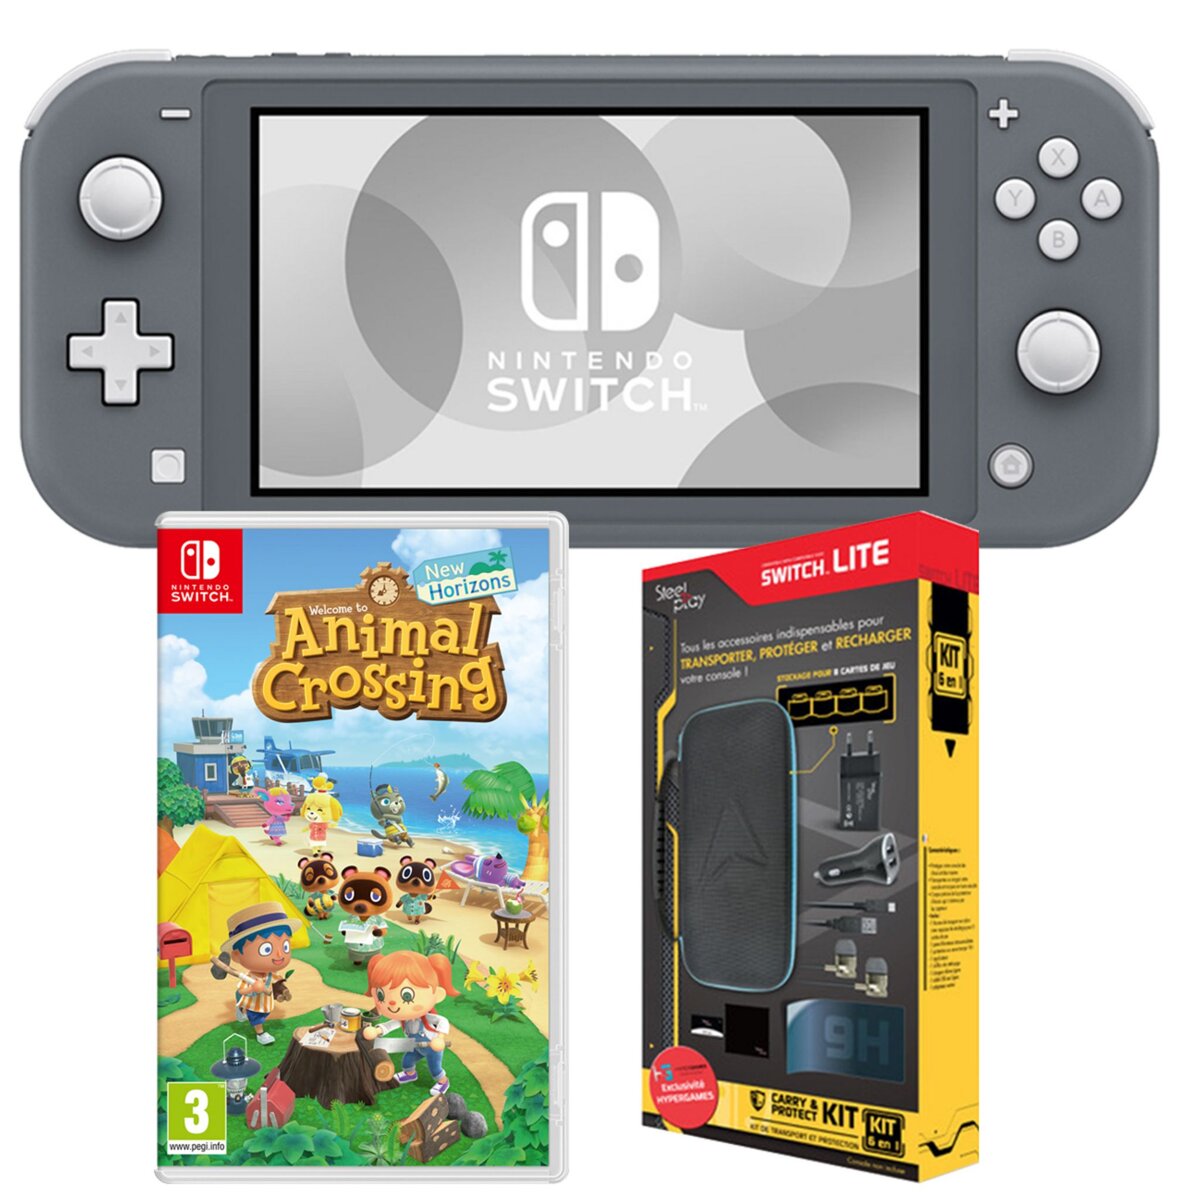 NINTENDO EXCLU WEB Console Nintendo Switch Lite Grise + Animal Crossing New Horizons + Pack 6 Accessoires Exclusif Auchan